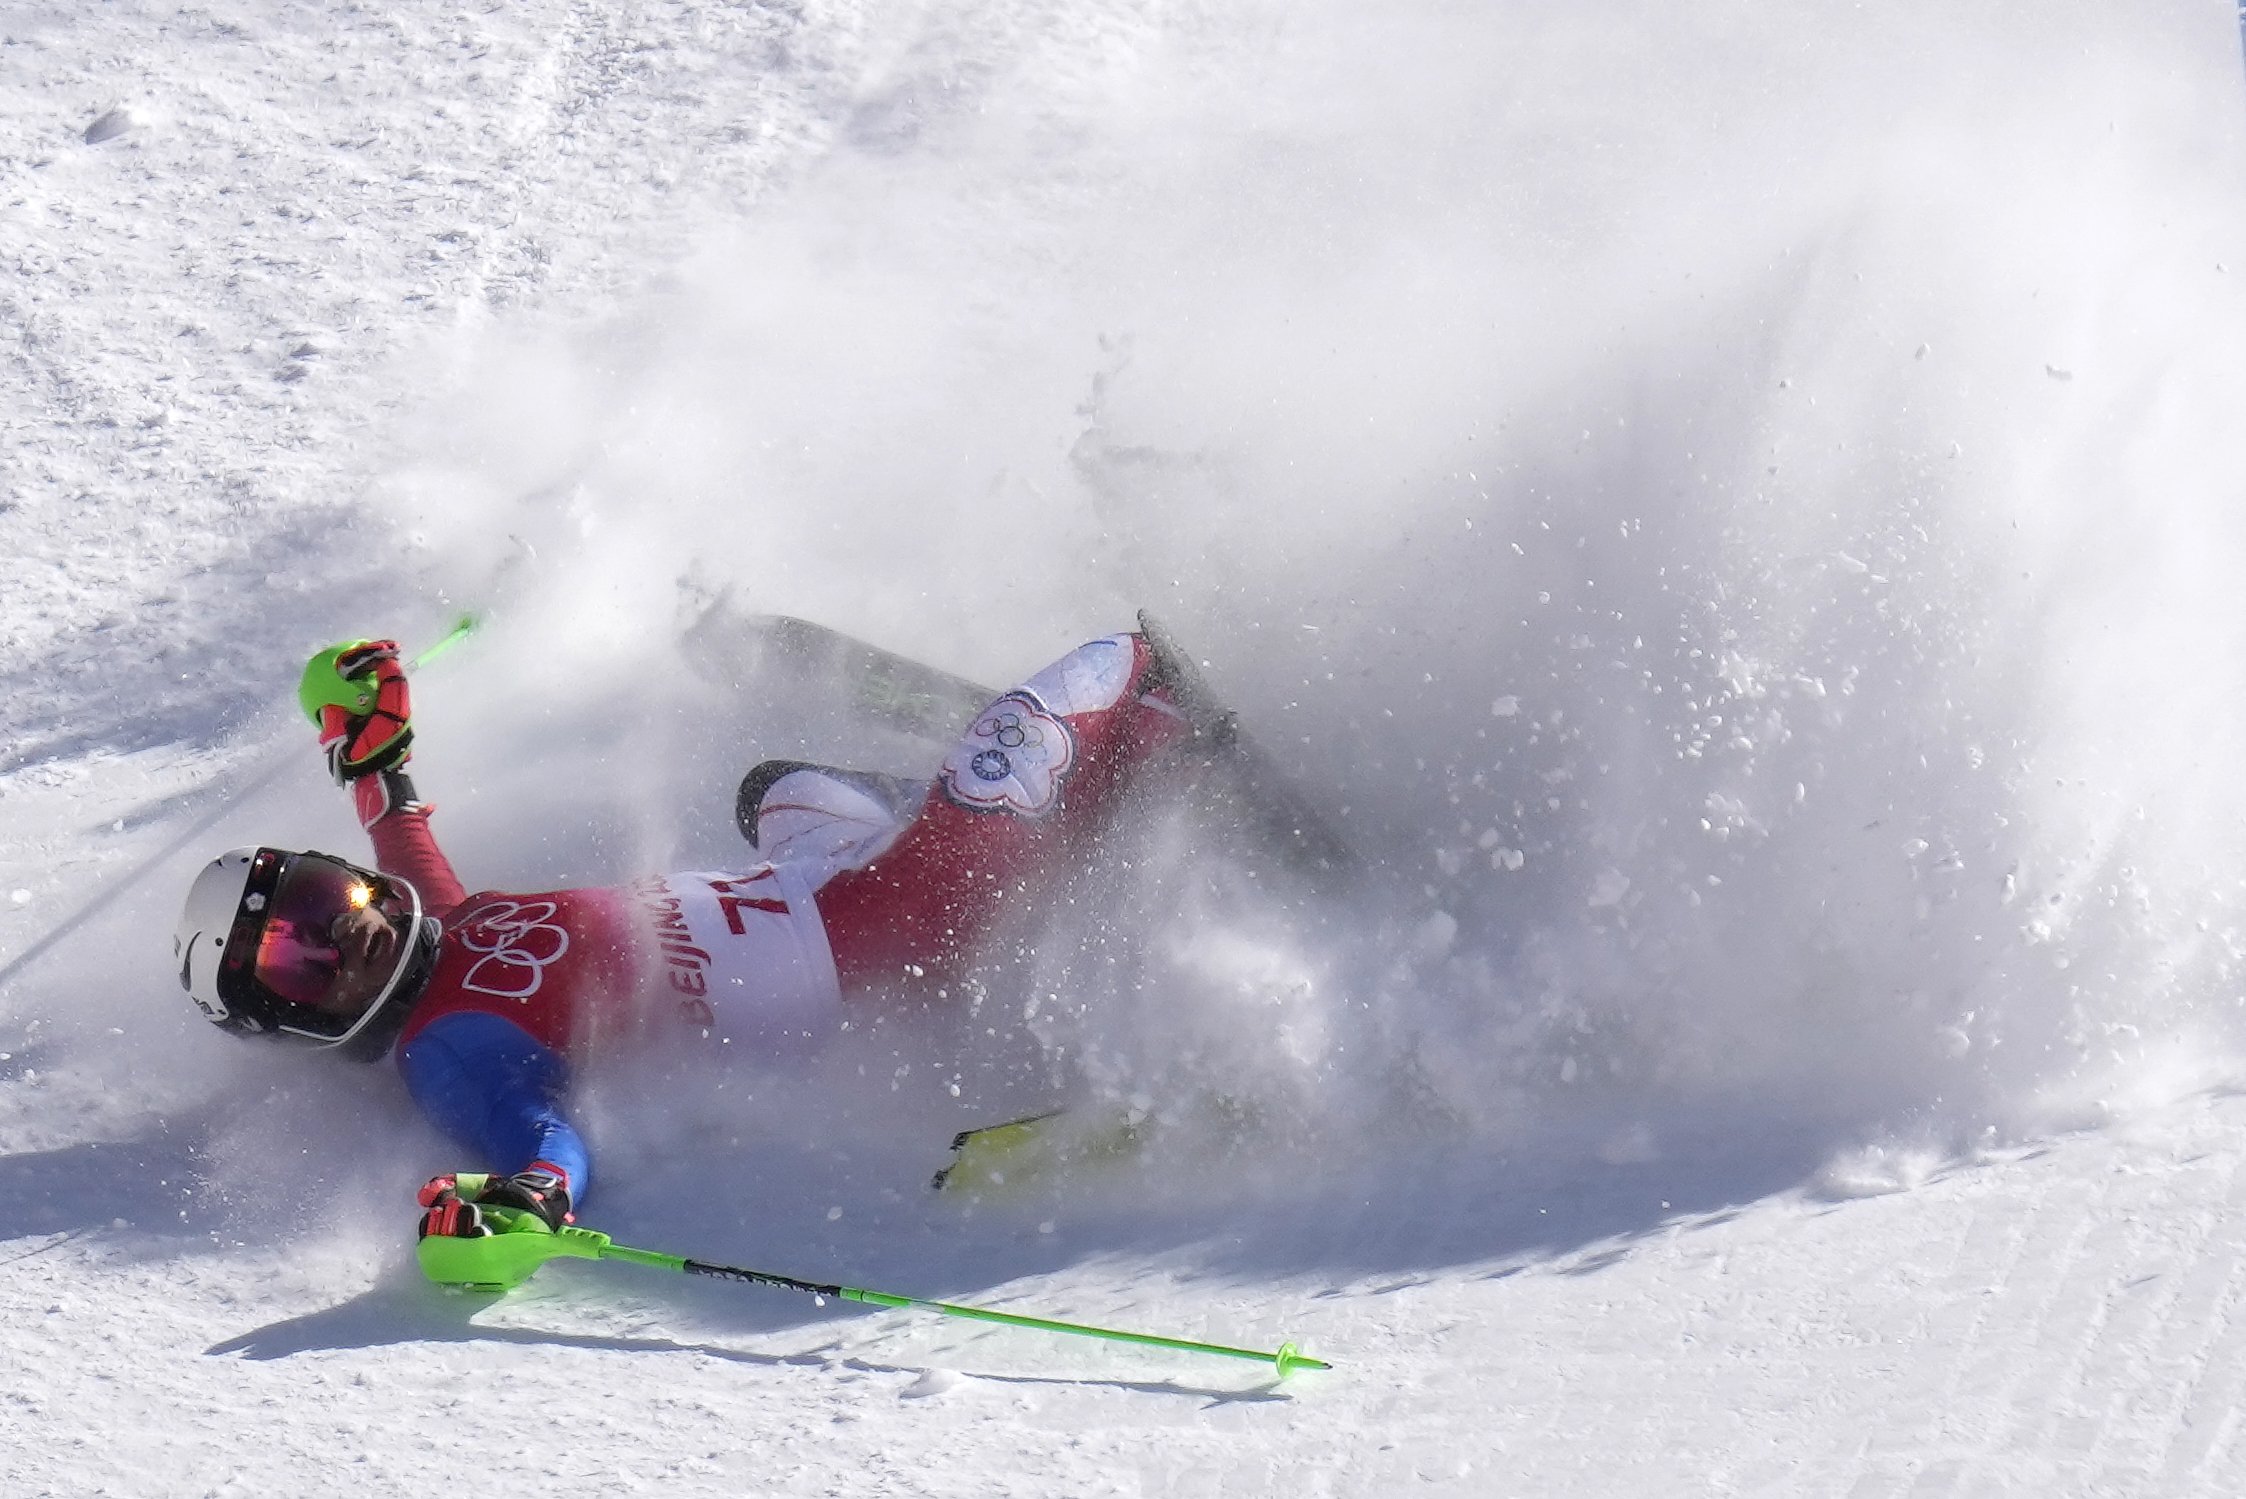  Ho Ping-jui, of Taiwan crashes out during the first run of the men's slalom at the 2022 Winter Olympics, Wednesday, Feb. 16, 2022, in the Yanqing district of Beijing. (AP Photo/Luca Bruno) 